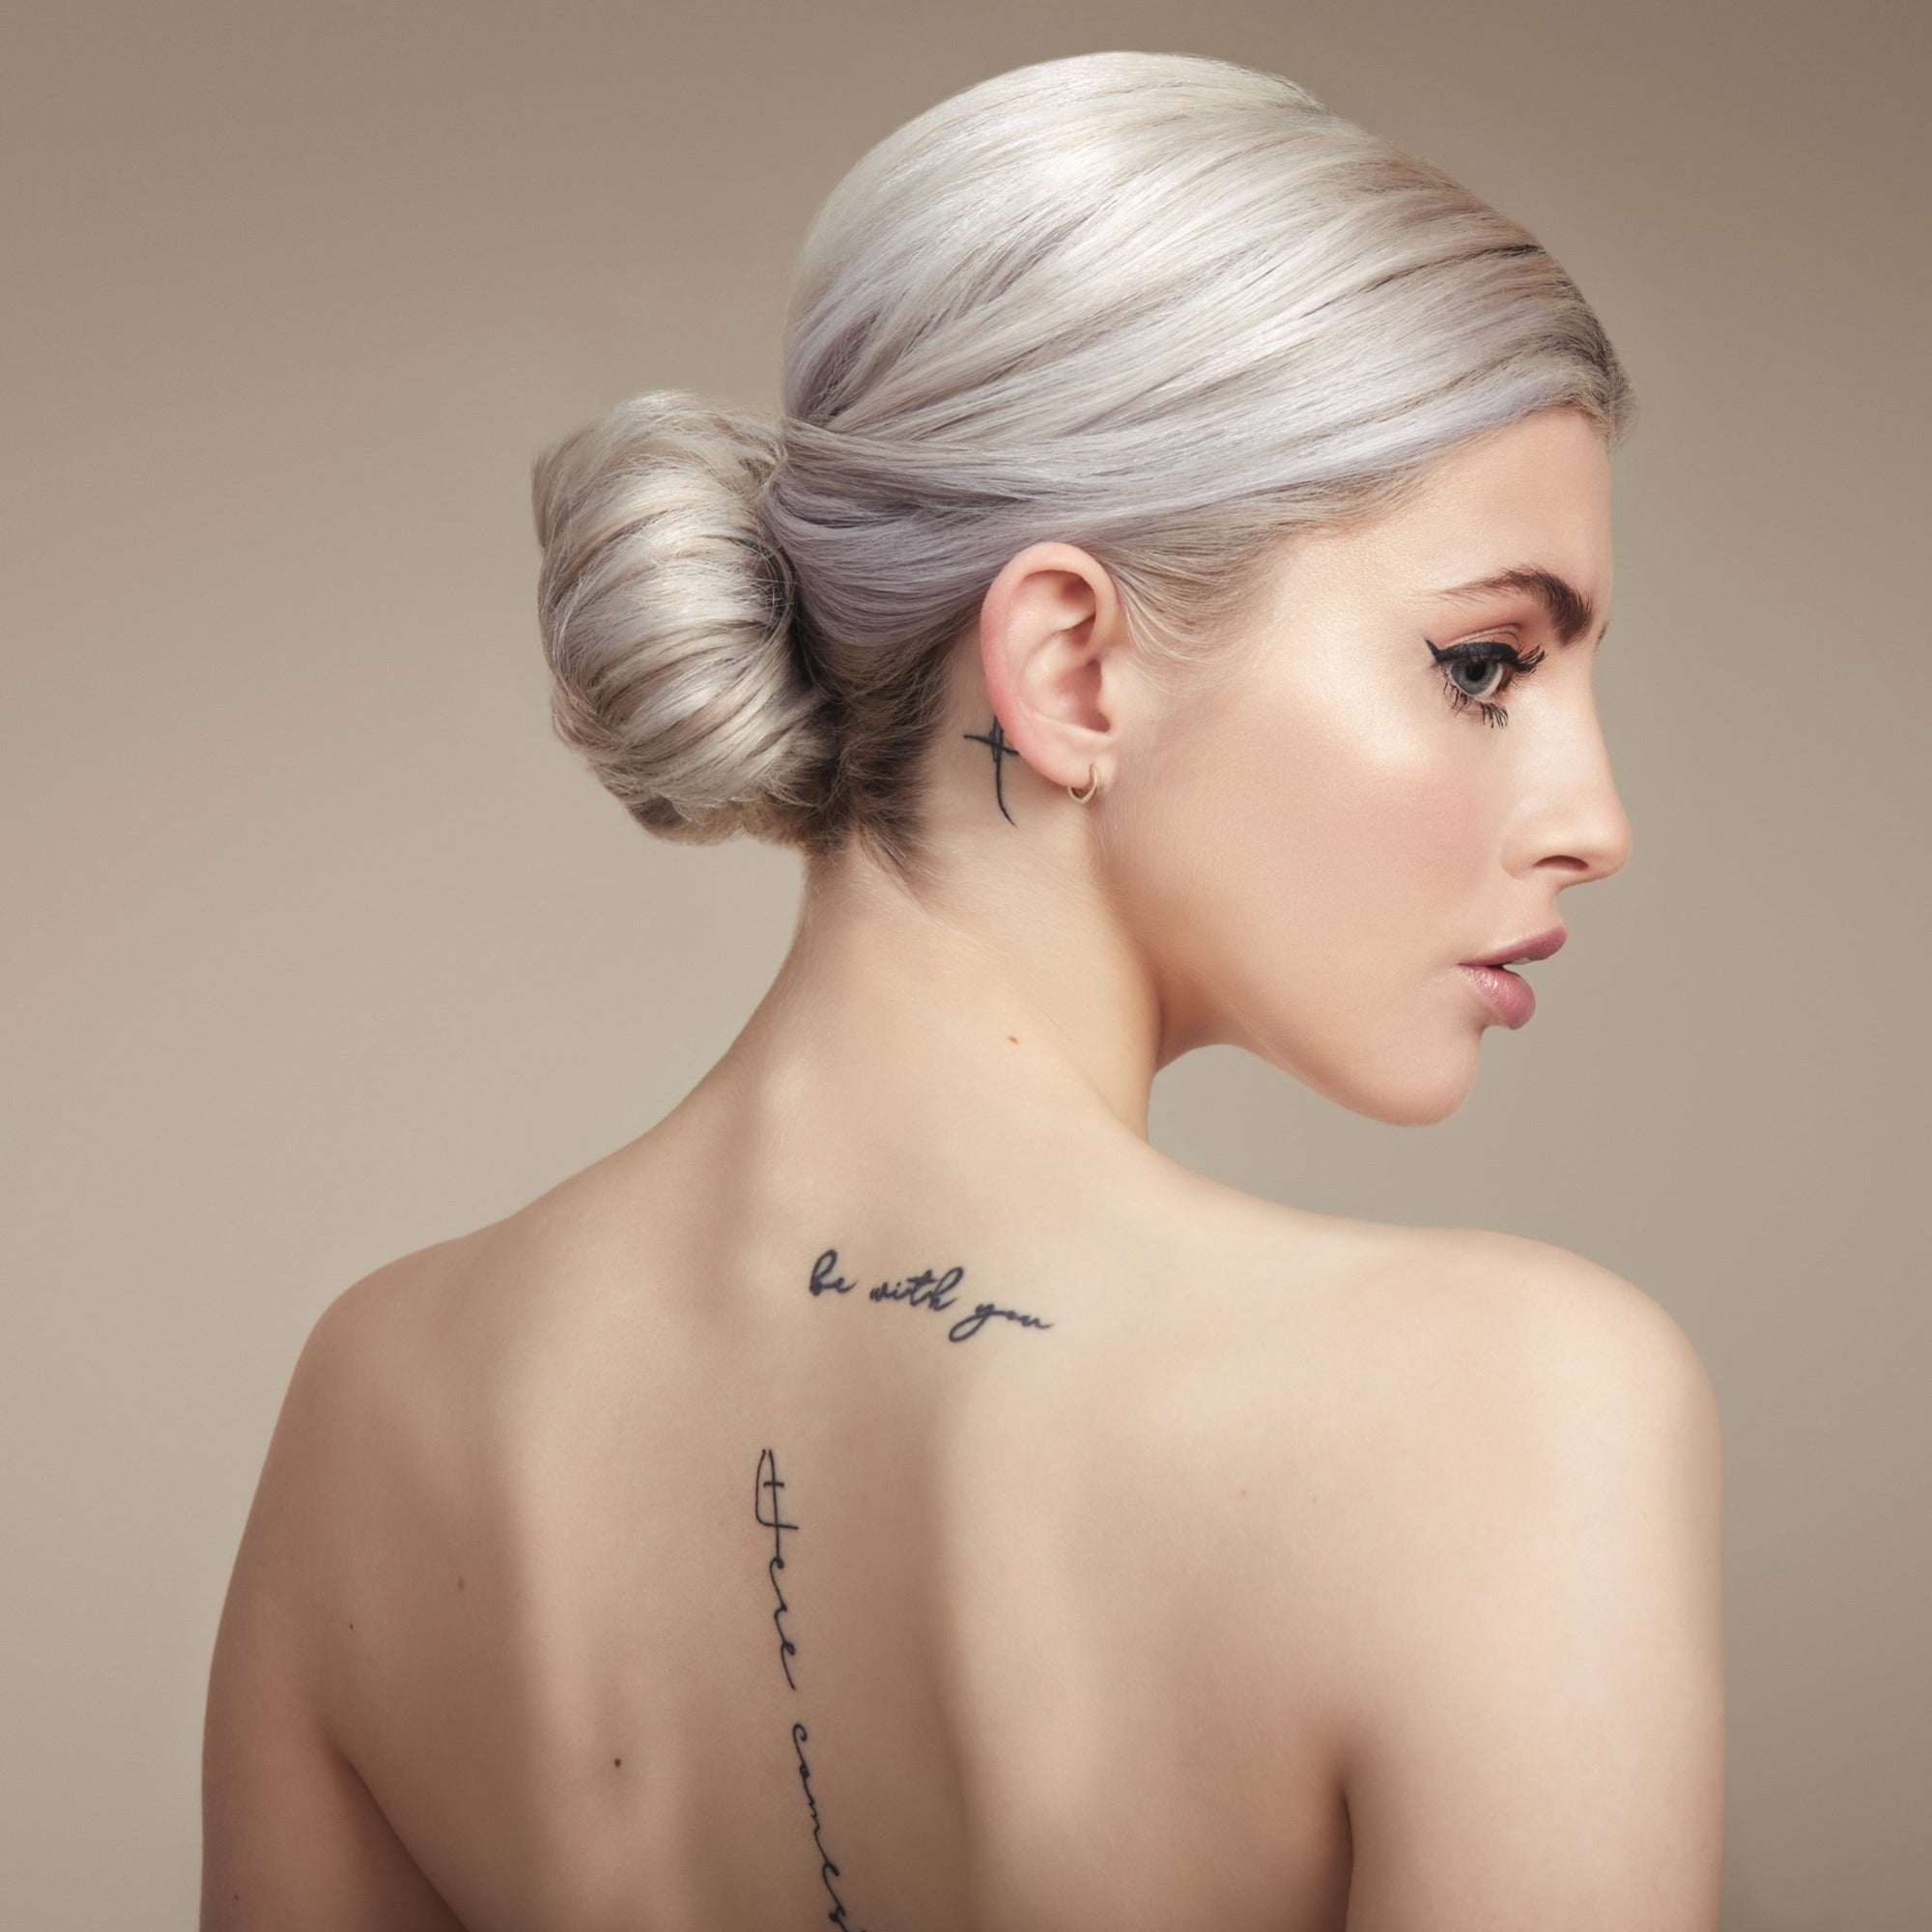 Female model with bleached blond hair in a bun. She has her back to the camera so you can see the bun and she is turning her head to the side so you can see her profile. Her back is bare and she has some tattoos. 